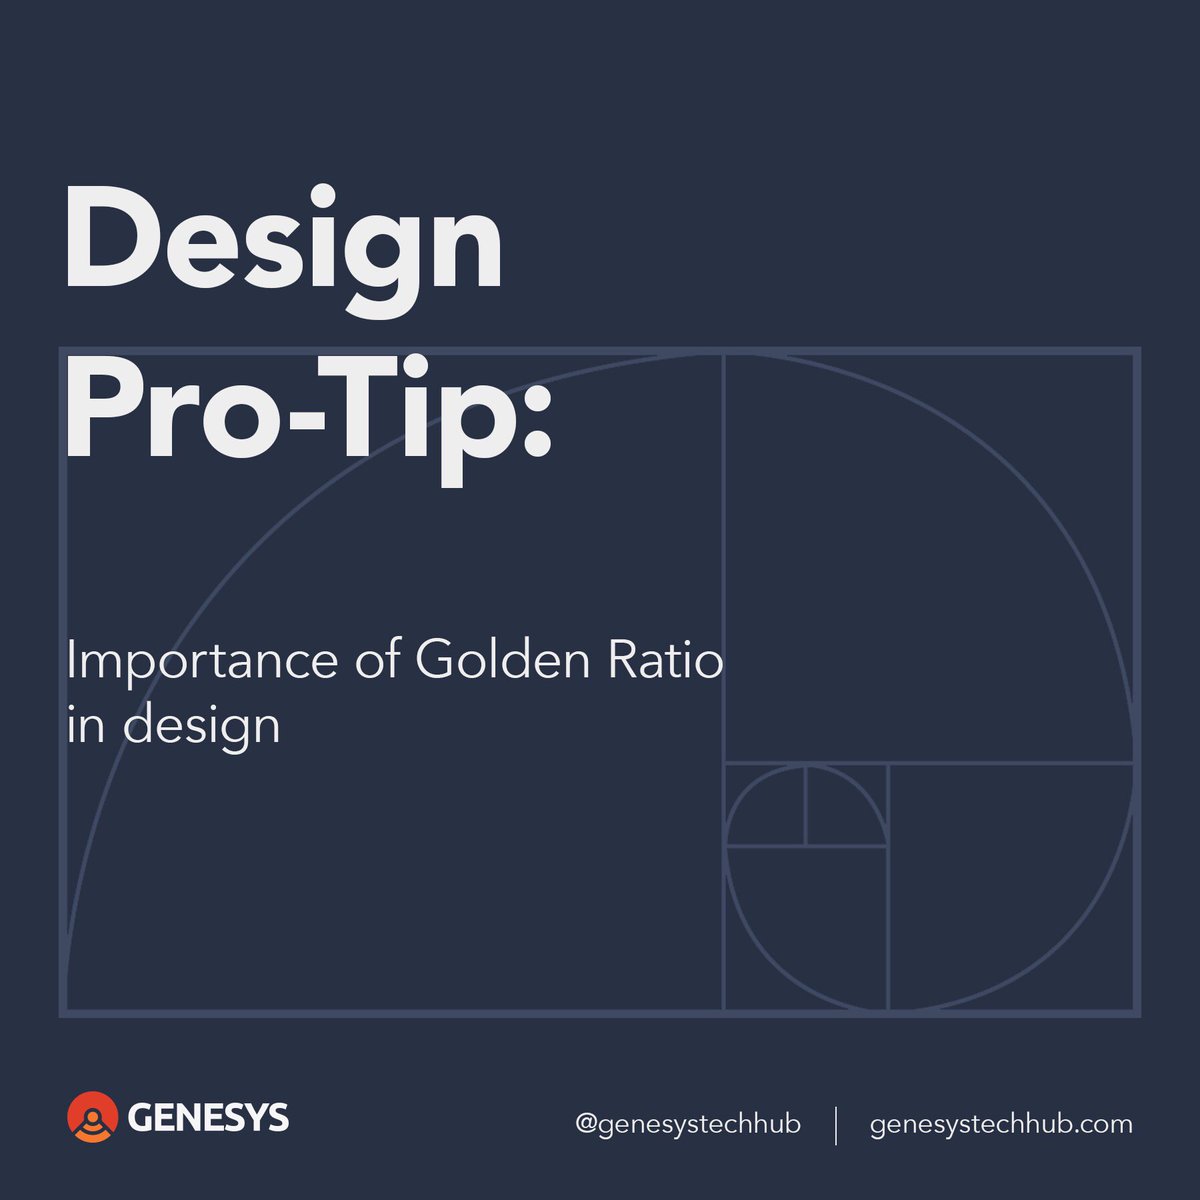 Hey guys!Thanks to David, our amazing head of product design, we are starting a Product Design Learning Series called  #DesignWithMong where we’ll examine all things design. Today we begin with Golden Ratios! #weAreGenesys  #GoldenRatio  #DesignWithMong  #designthinking